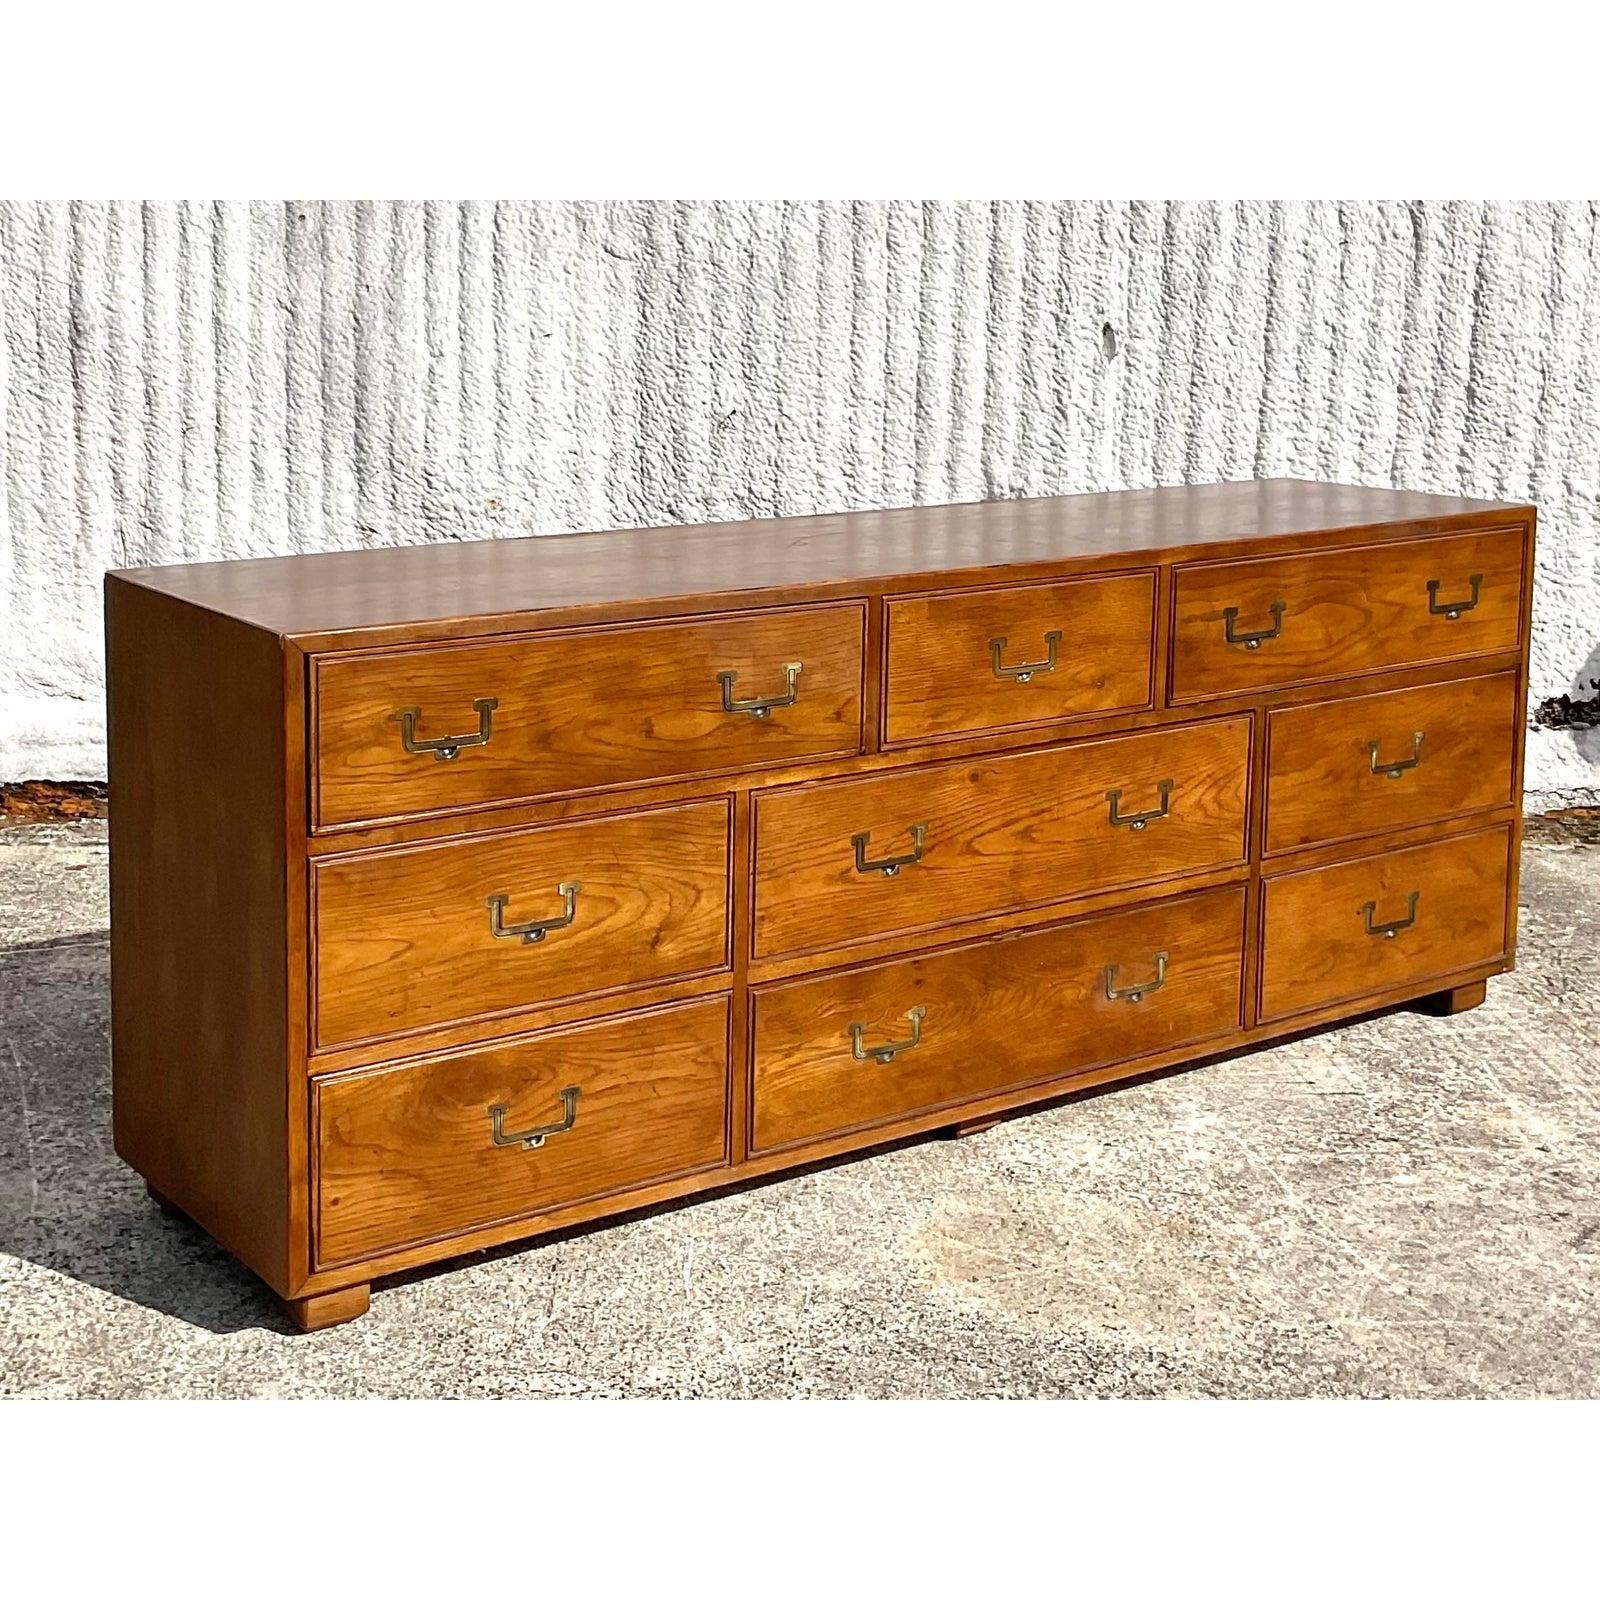 A beautiful midcentury 9 drawer dresser. Made by the iconic Henredon furniture company. Chic brass campaign hardware. Acquired from a Palm Beach estate.